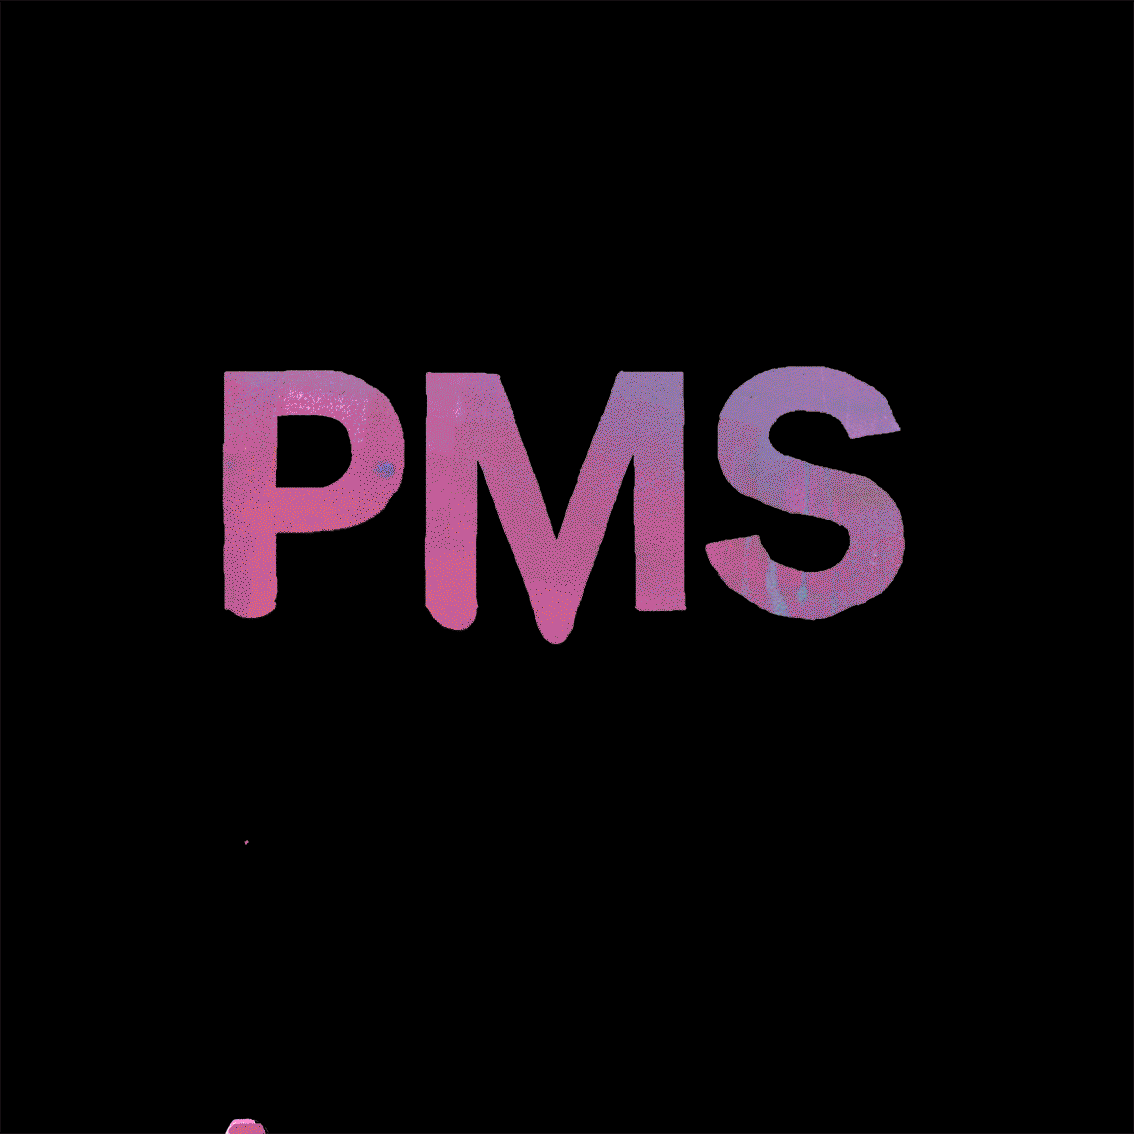  The exhibition curated by me features the work of 22 artists as they share their perspectives on premenstrual syndrome. Self-identifying as an augmented-reality exhibition with an emphasis on utilizing GIFs, attendees can download the ‘PMS Augmented